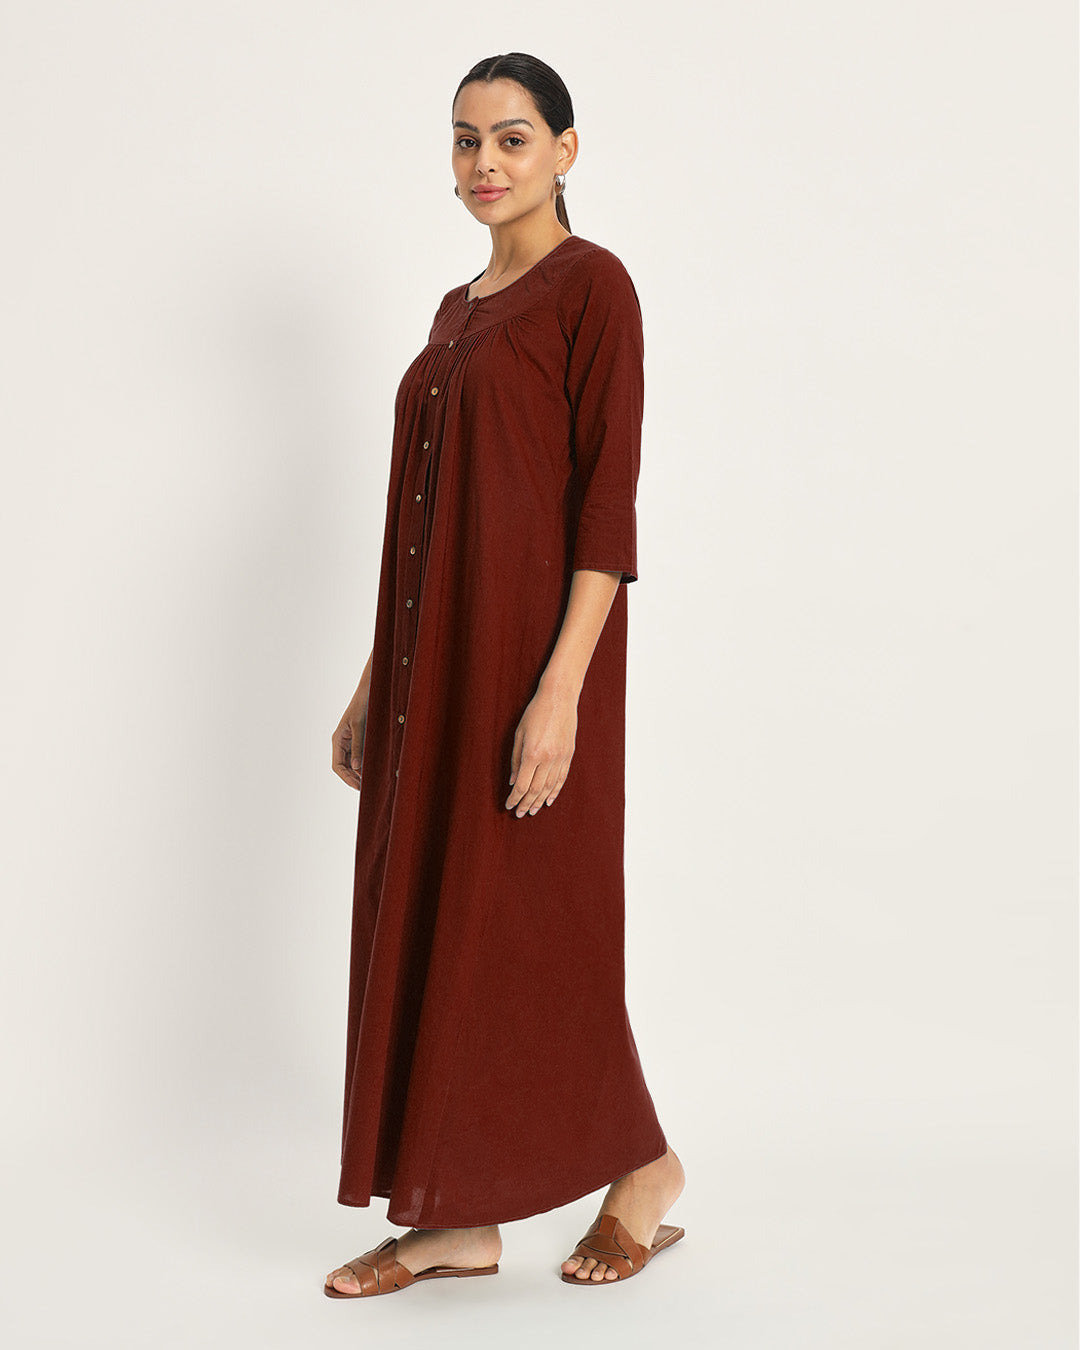 Combo: Russet Red & Sage Green Nighttime Must-Have Nightdress